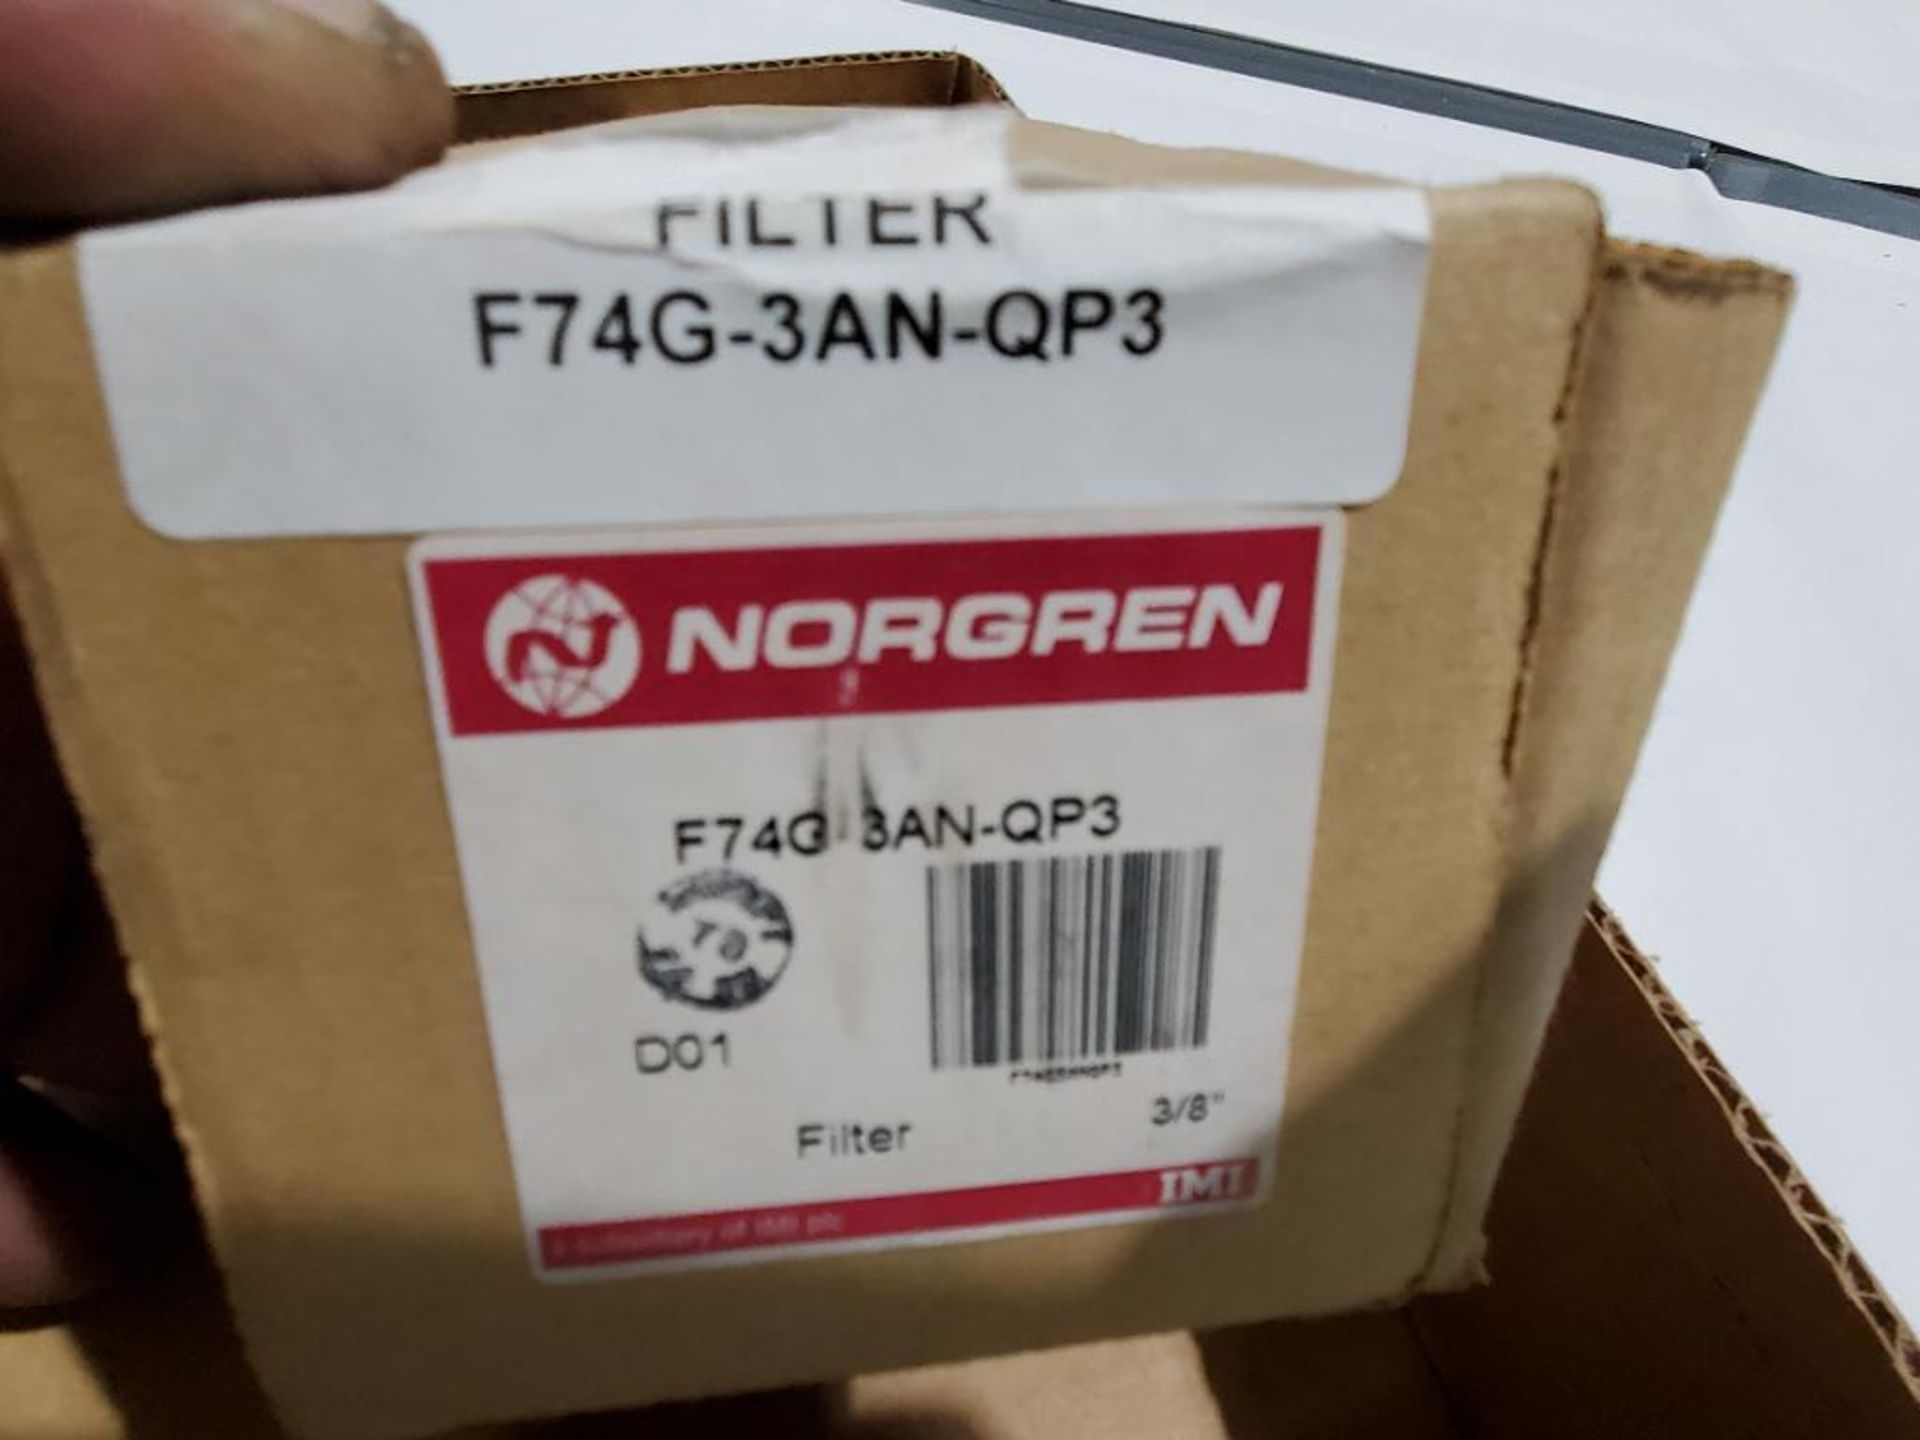 Qty 3 - Norgren part number F74G-3AN-QP3. - Image 4 of 5